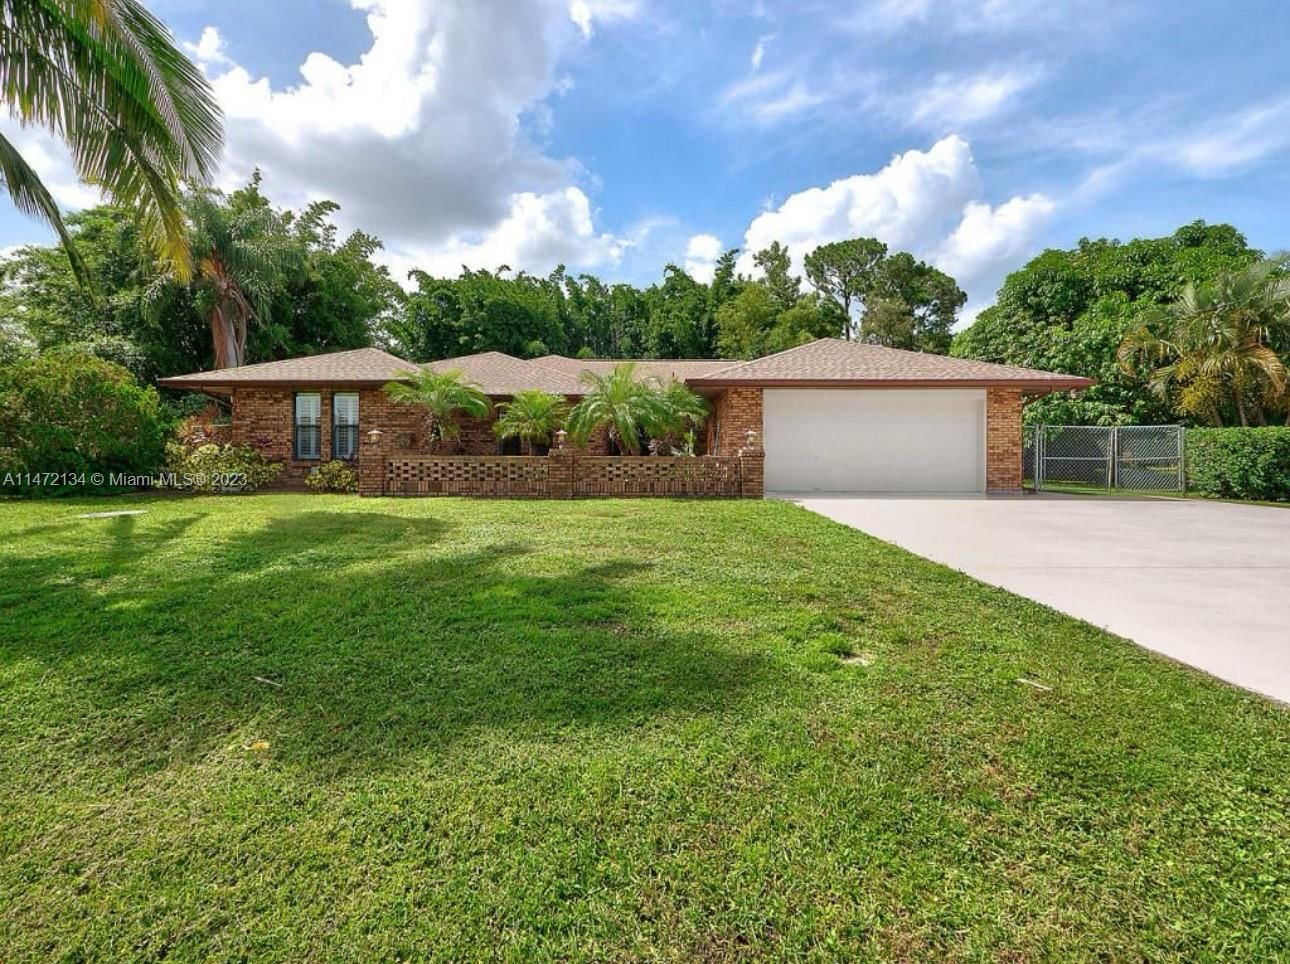 Real estate property located at 285 Verada Ave, St Lucie County, PORT ST LUCIE SECTION 24, Port St. Lucie, FL